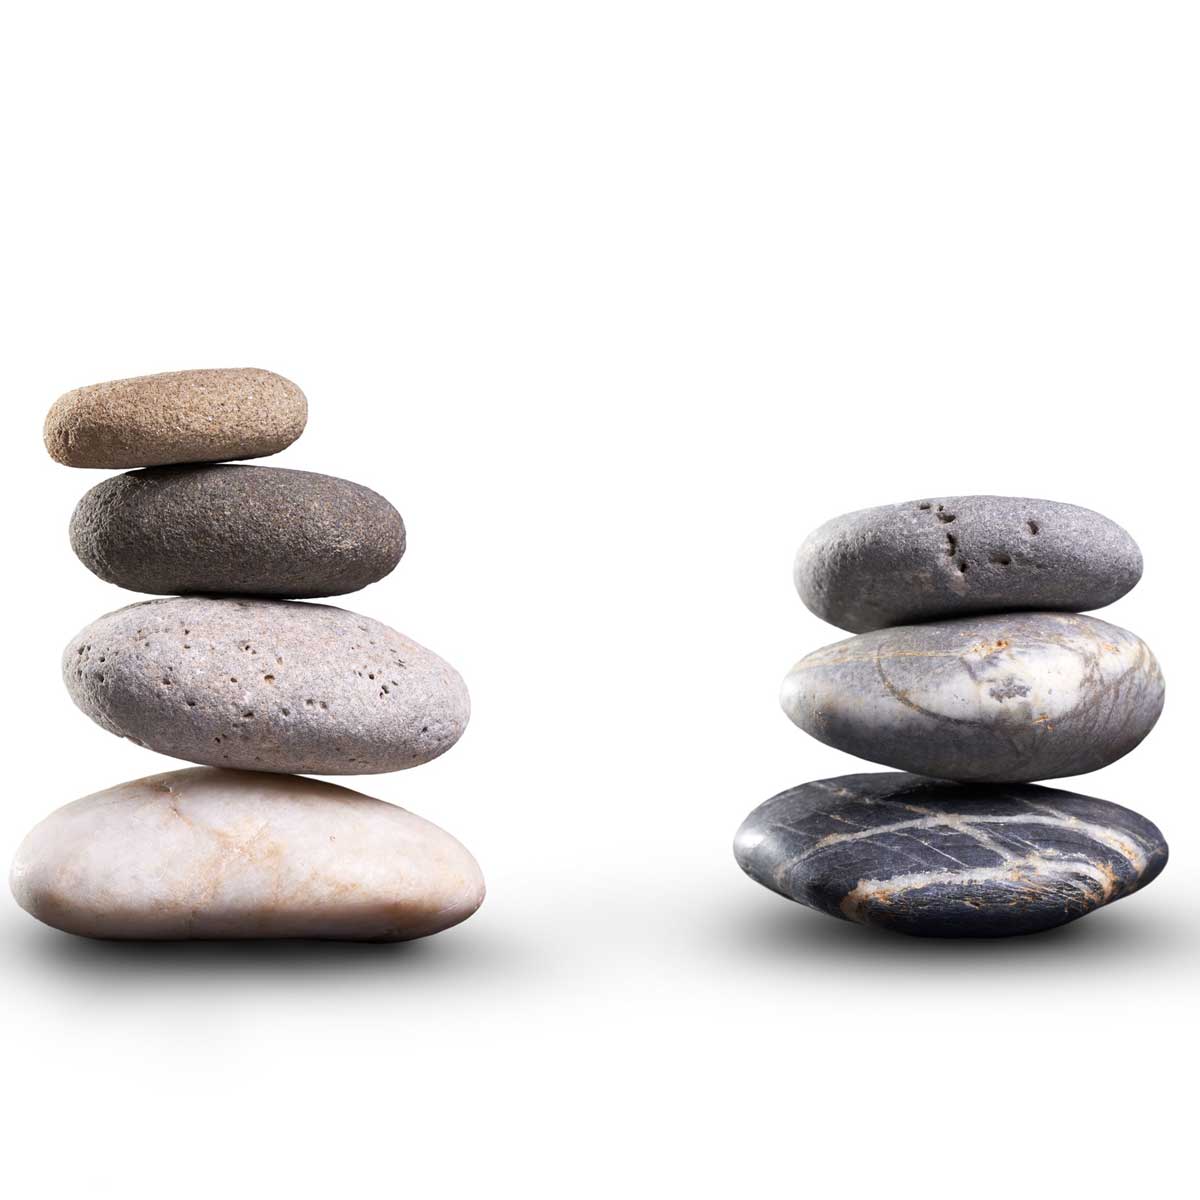 A collection of pile of stones isolated on a white background